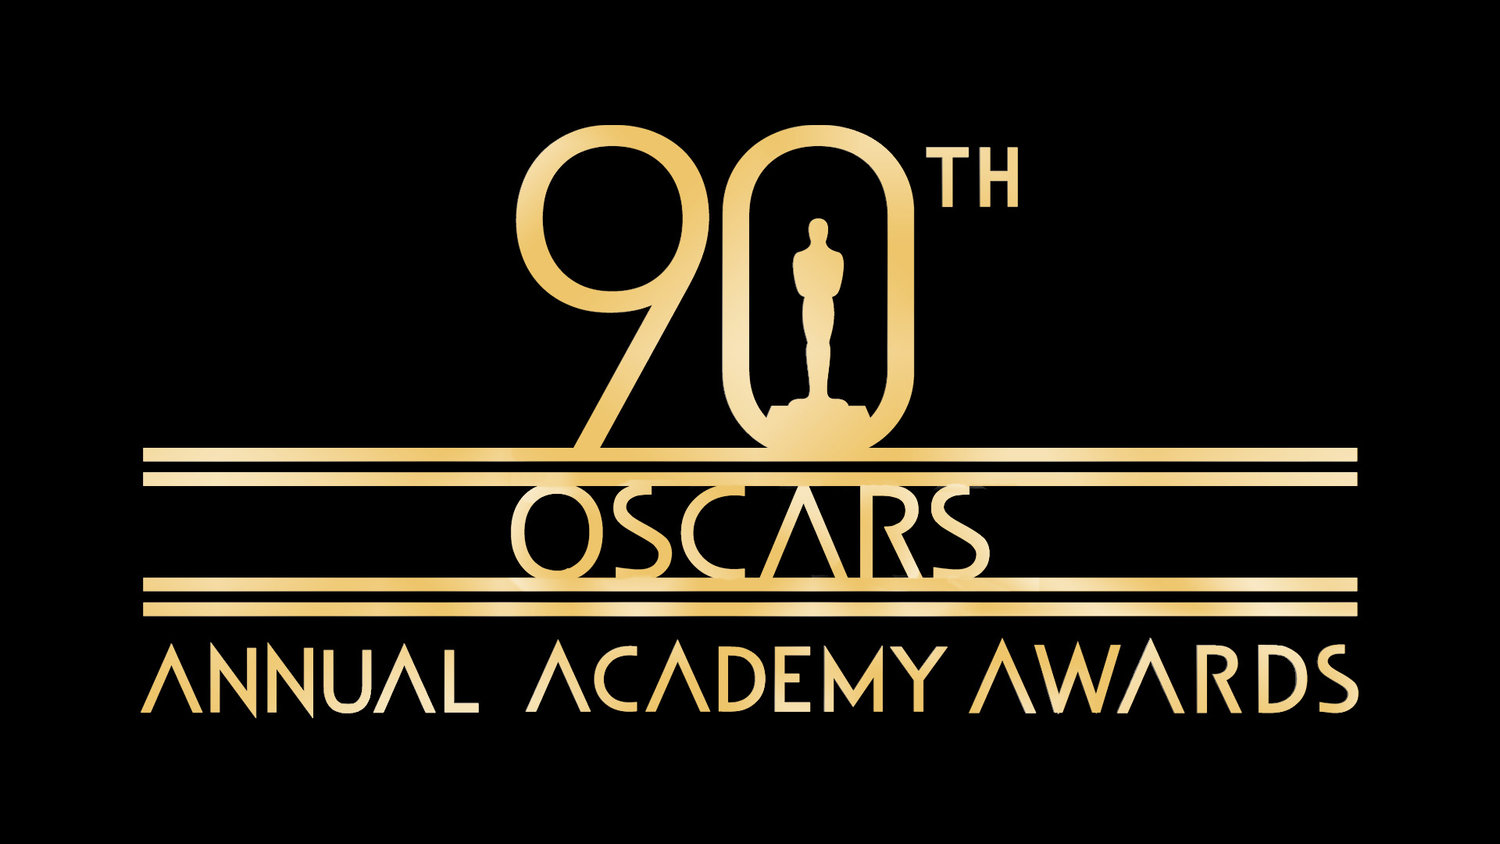 Ep43 - 90th Annual Academy Awards (Oscars) Nominations, Surprises and Snubs  - 1/23/18